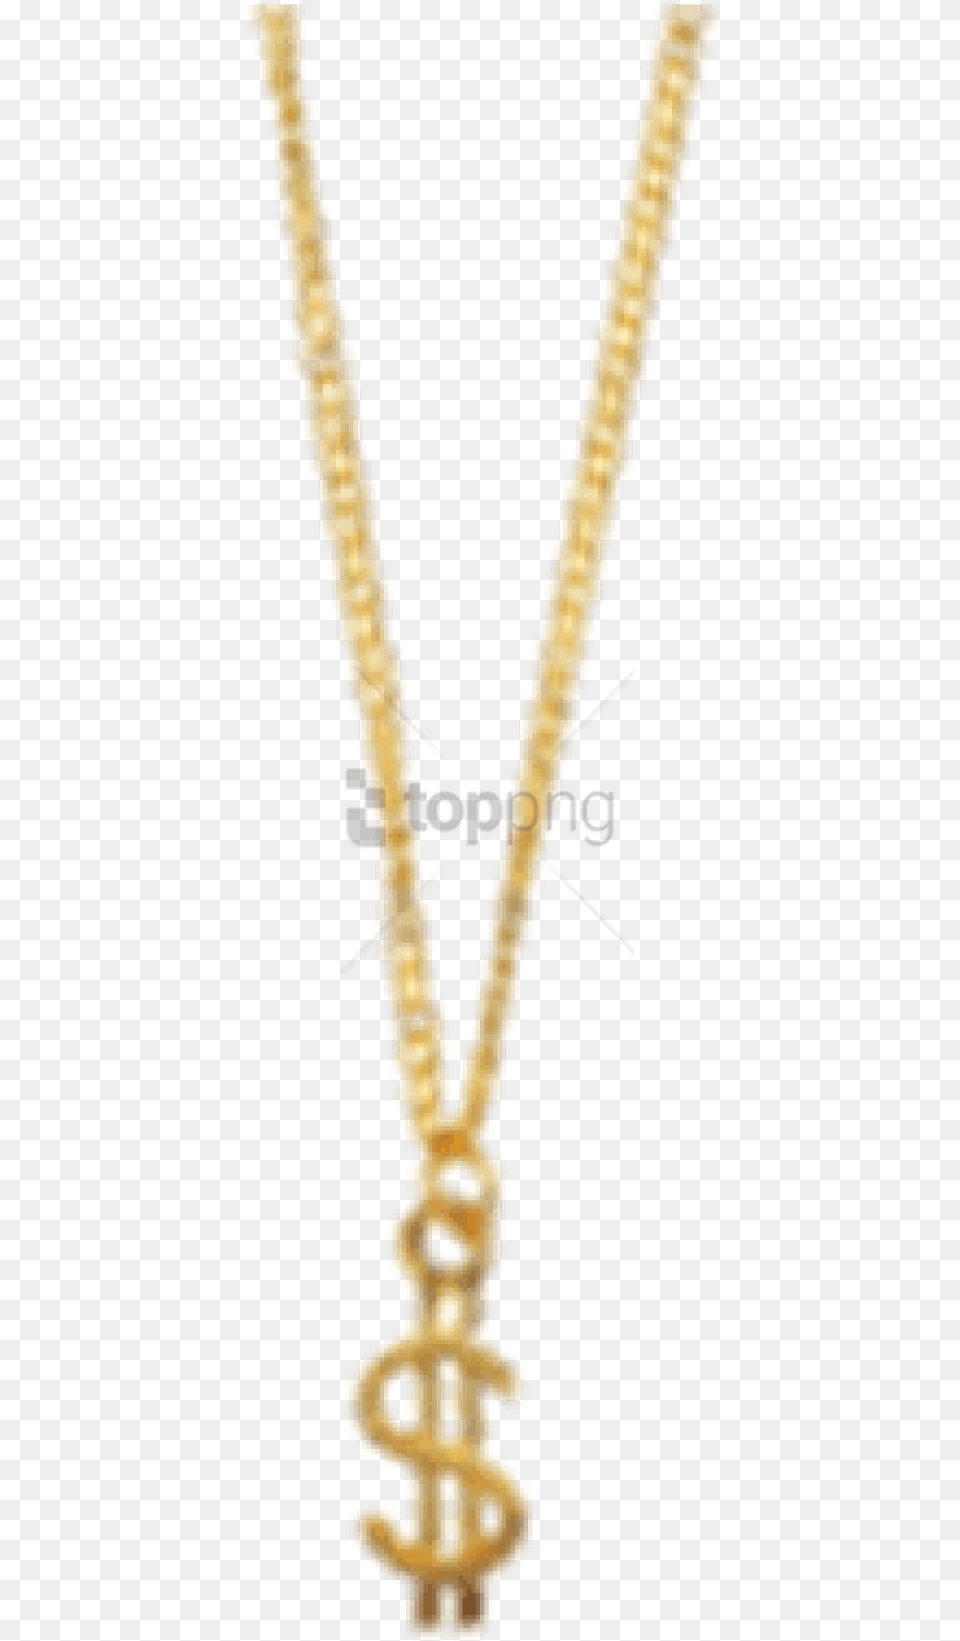 Gold Dollar Symbol Chain Transparent Background, Accessories, Jewelry, Necklace, Smoke Pipe Png Image